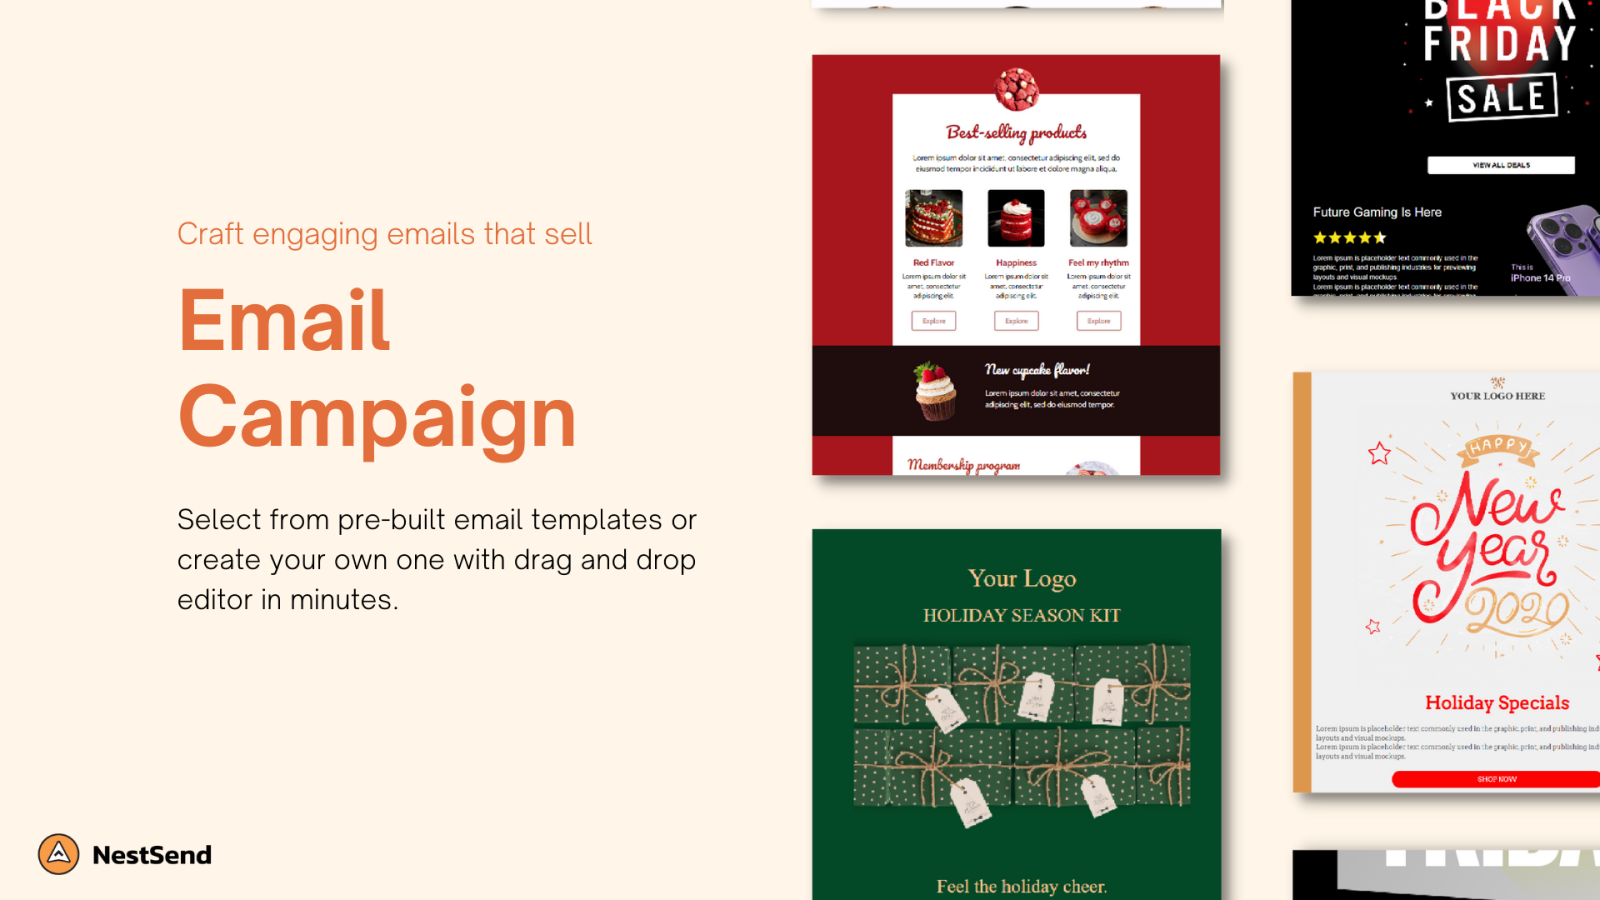 Craft engaging emails with pre-made templates